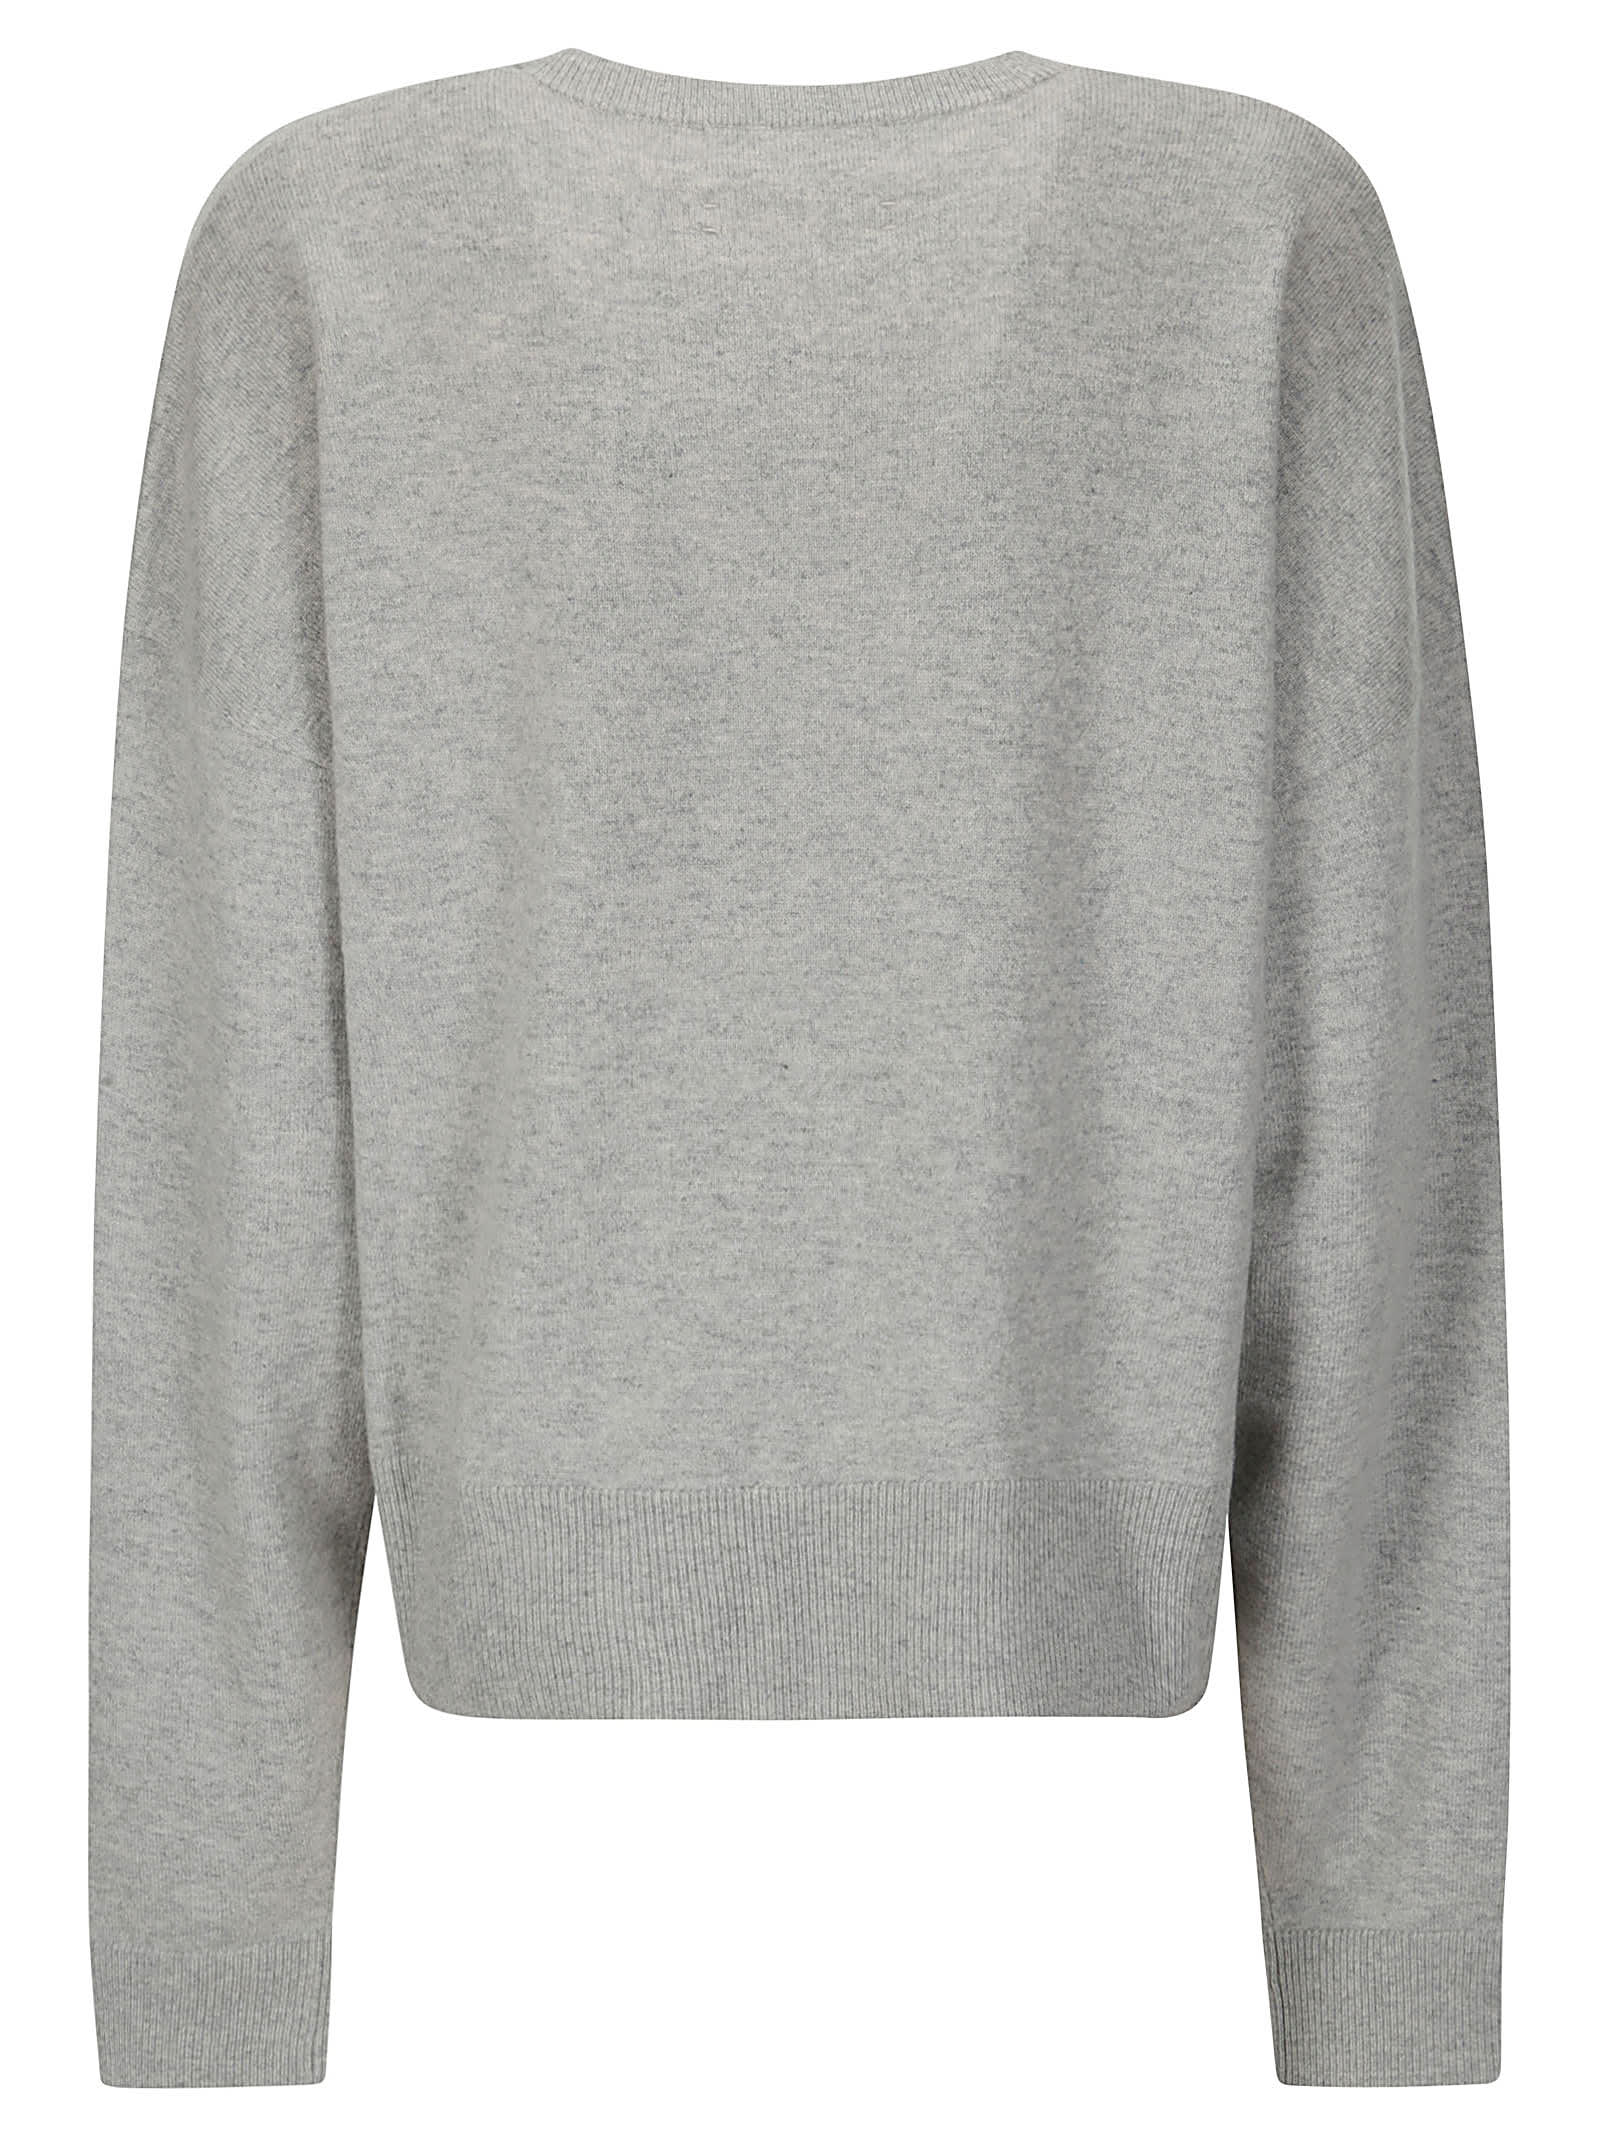 Shop Extreme Cashmere Clash In Grey